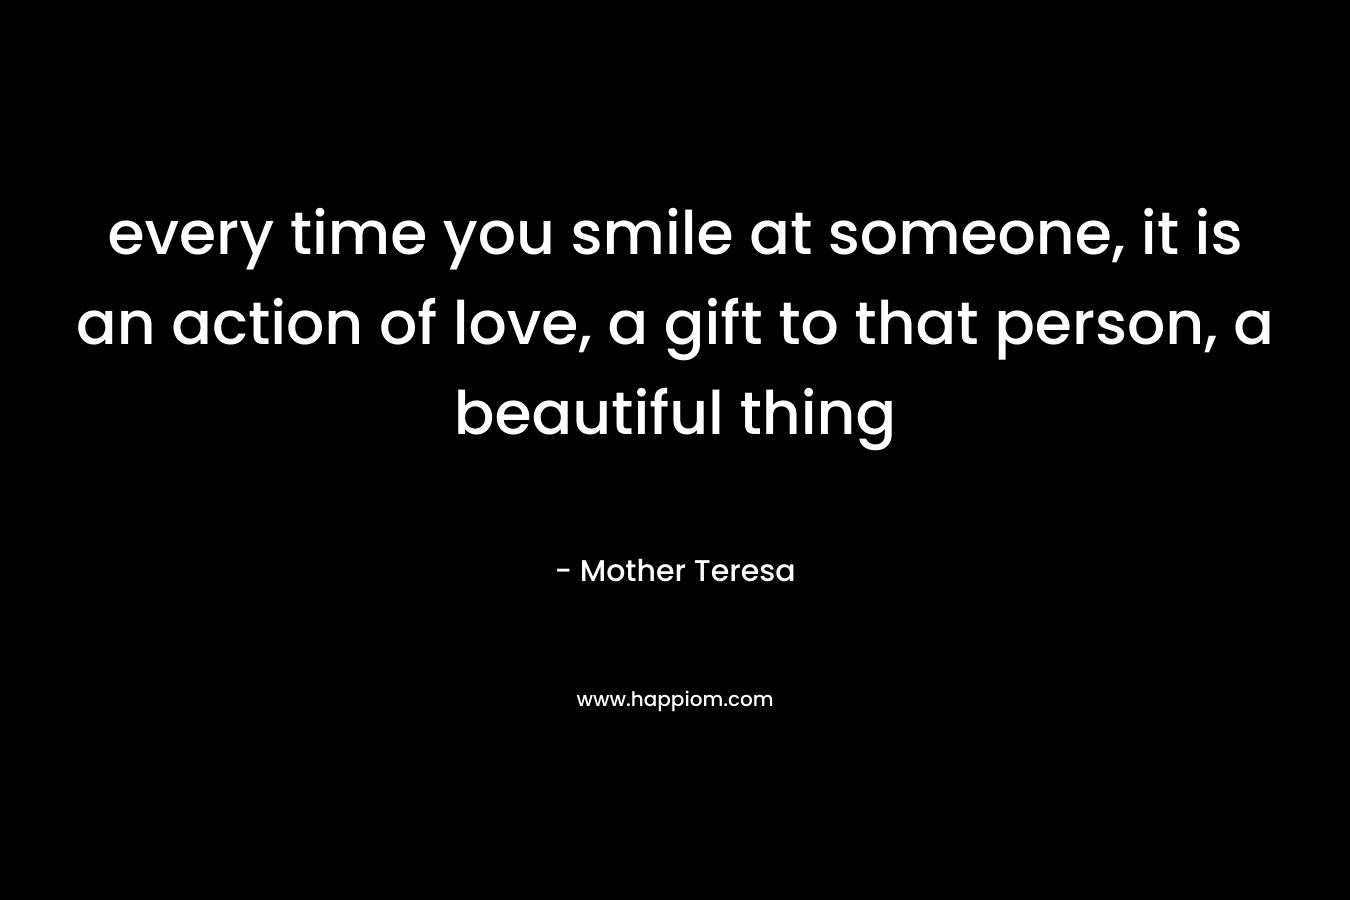 every time you smile at someone, it is an action of love, a gift to that person, a beautiful thing – Mother Teresa